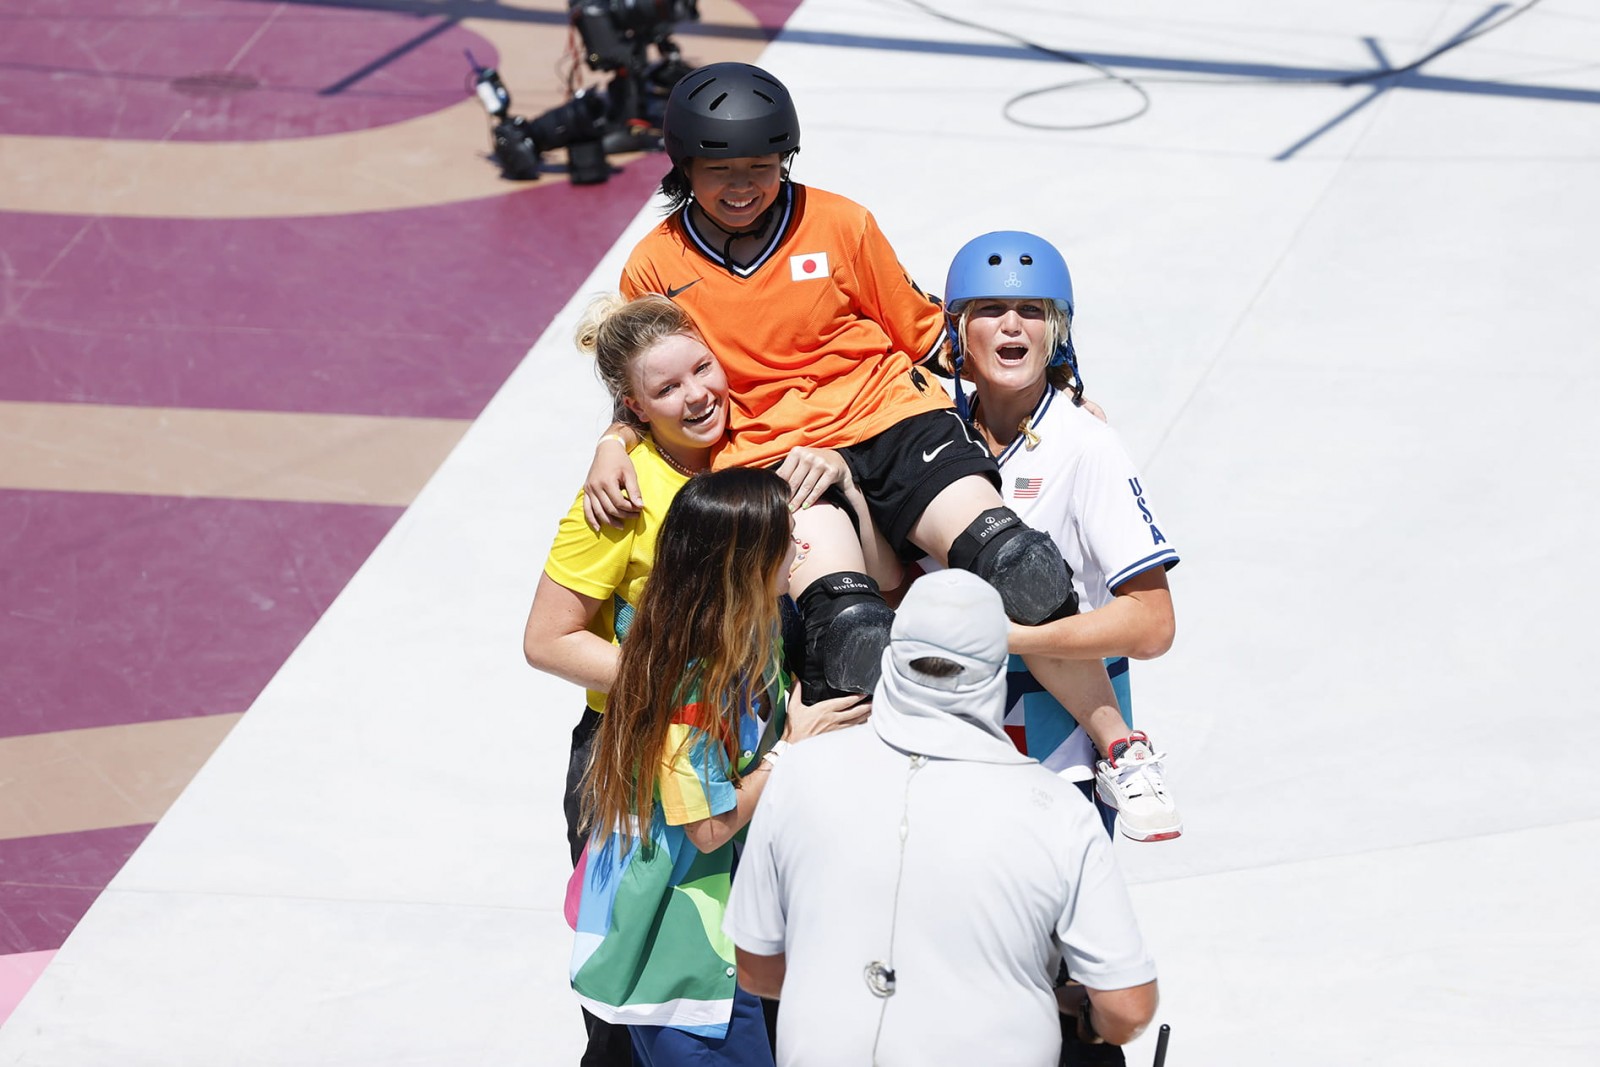 Athletes from other countries lift Misugu Okamoto on their shoulders after she fell attempting an indie flip during the Tokyo 2020 women’s skateboarding park finals. ©Photo Kishimoto